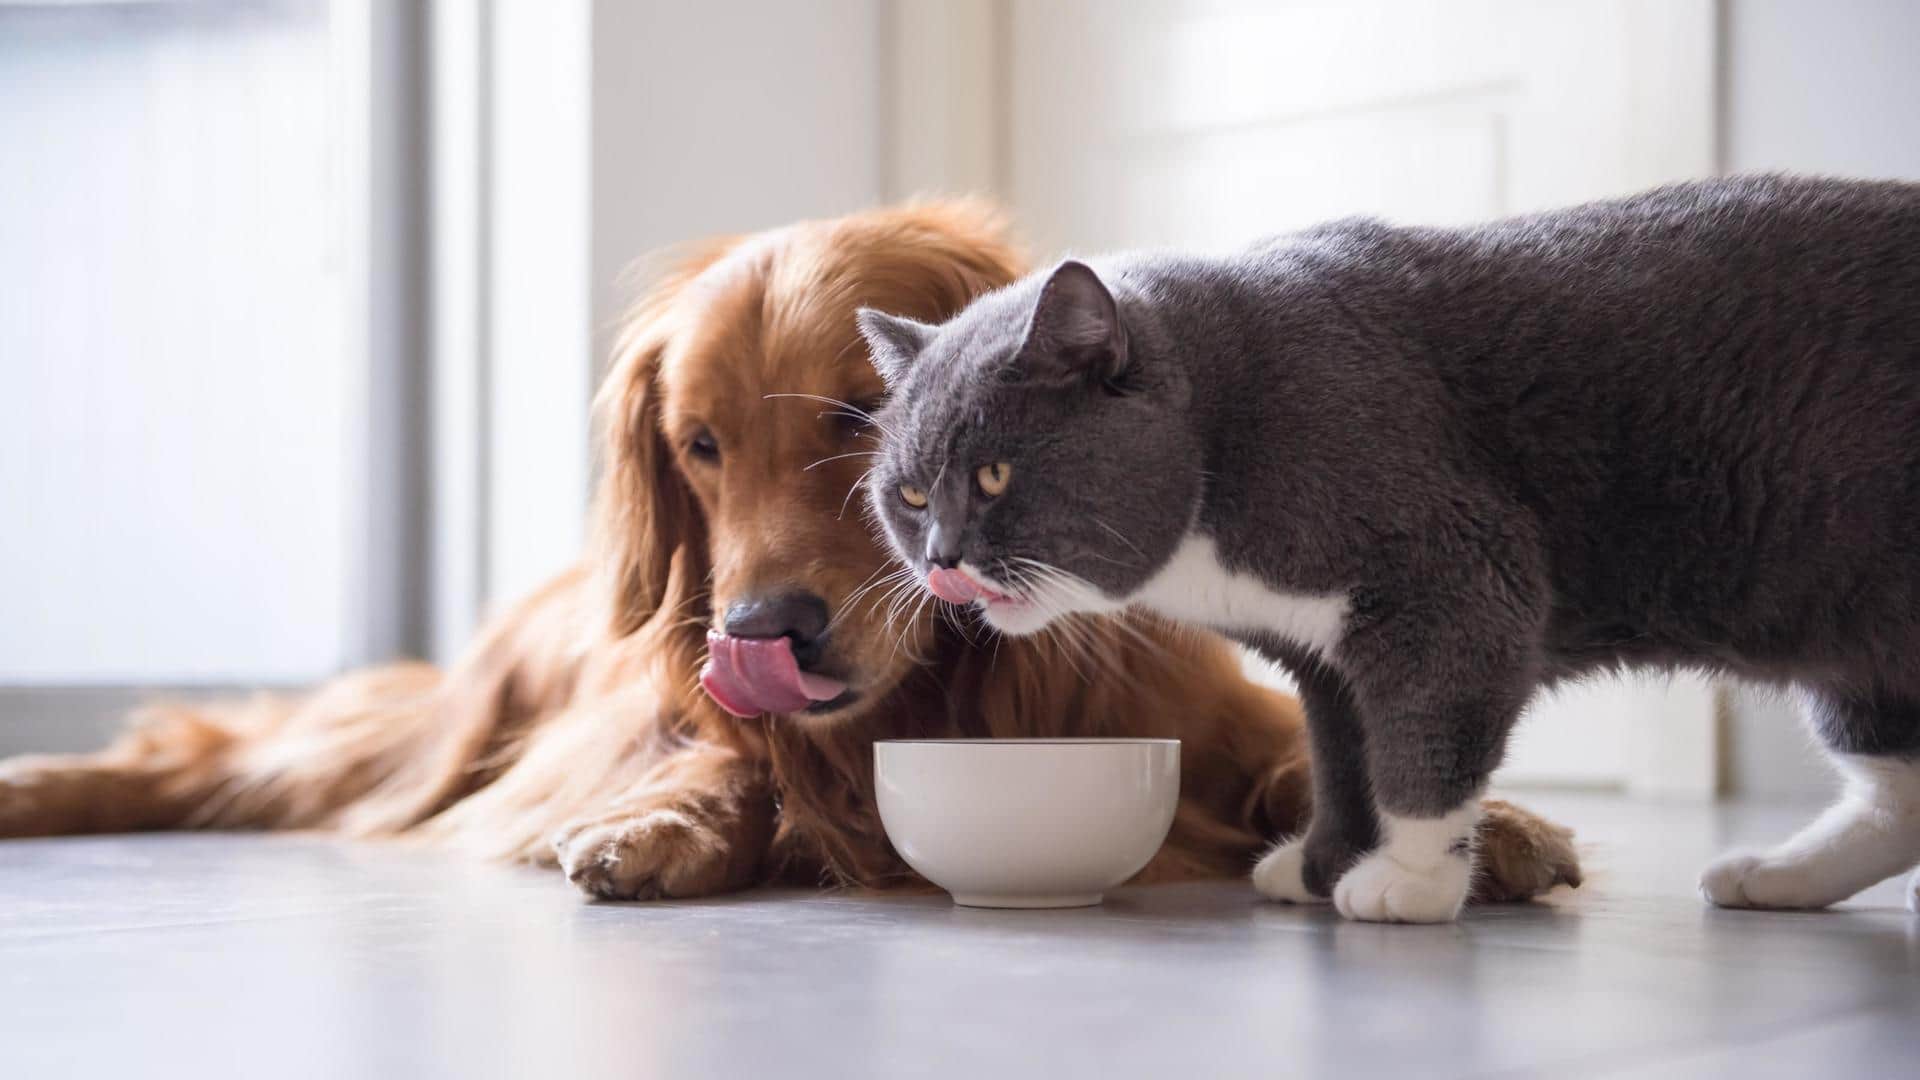 Can cats eat dog food? Expert opines on cross-feeding